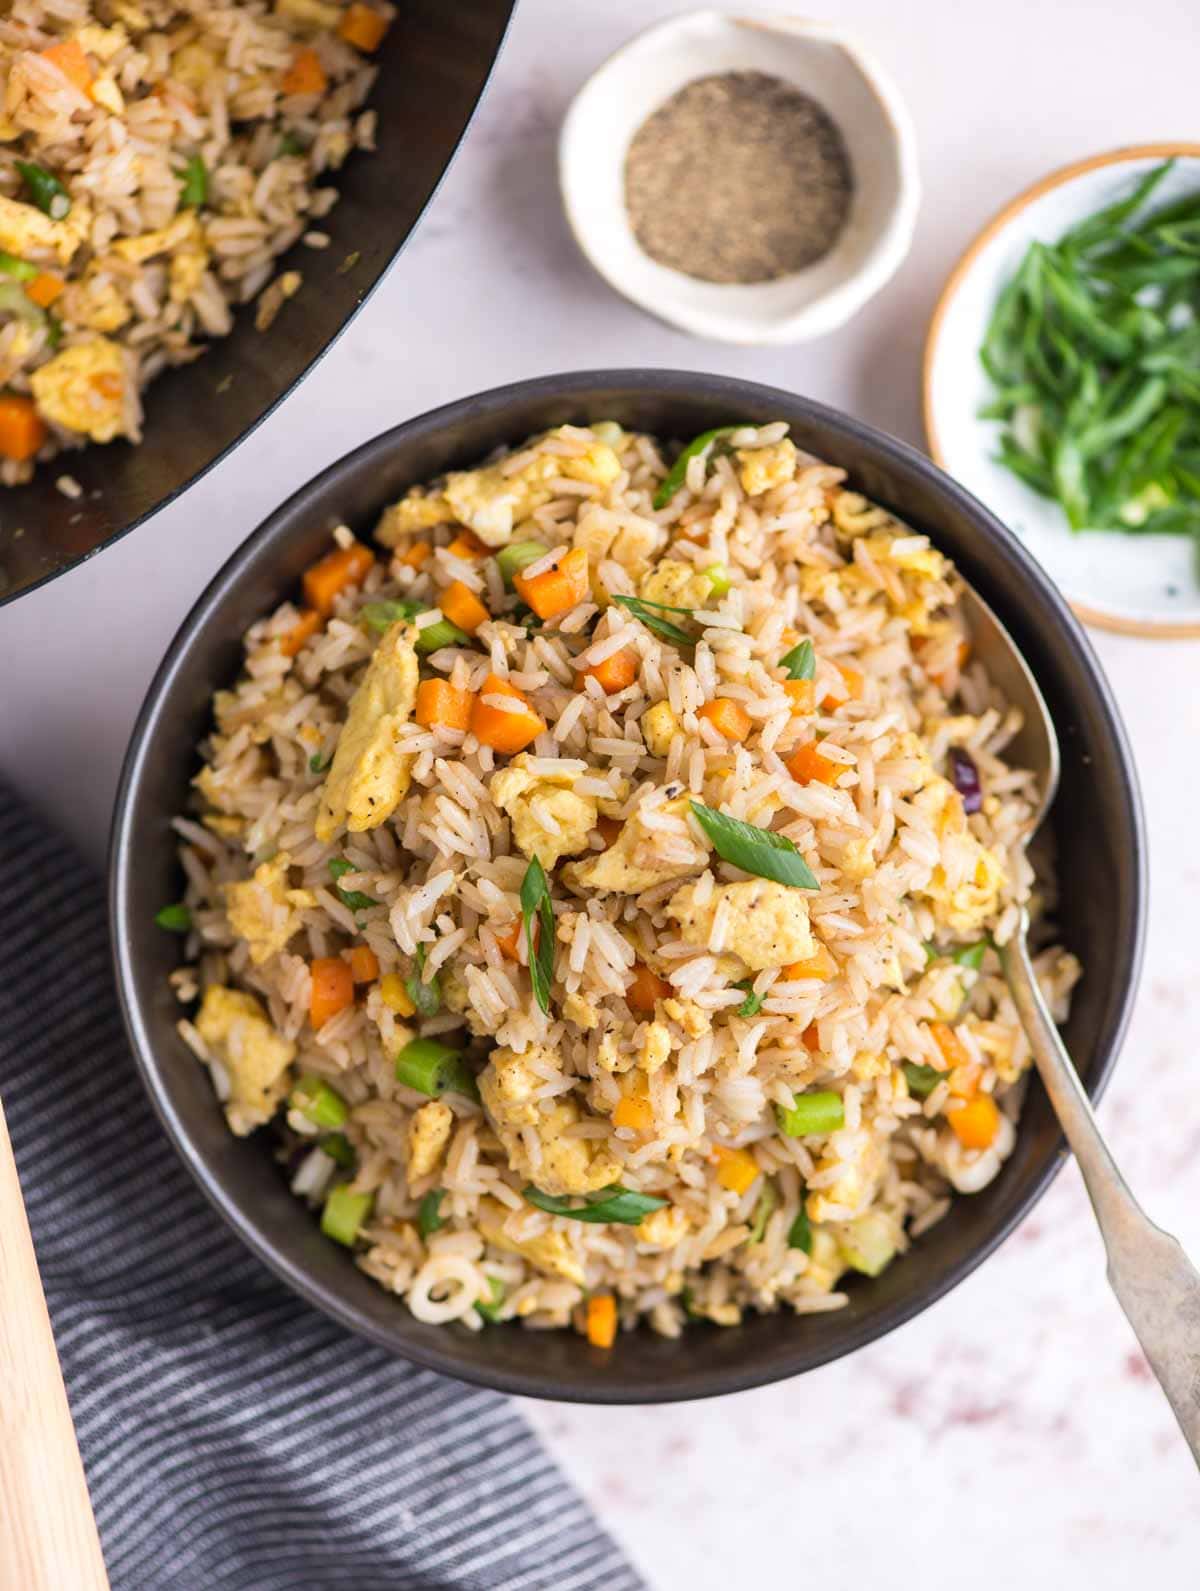 Egg fried rice - Nice fluffy rice, scrambled egg, crunchy vegetables, this restaurant-style fried rice is so easy and can be made in less than 20 minutes.